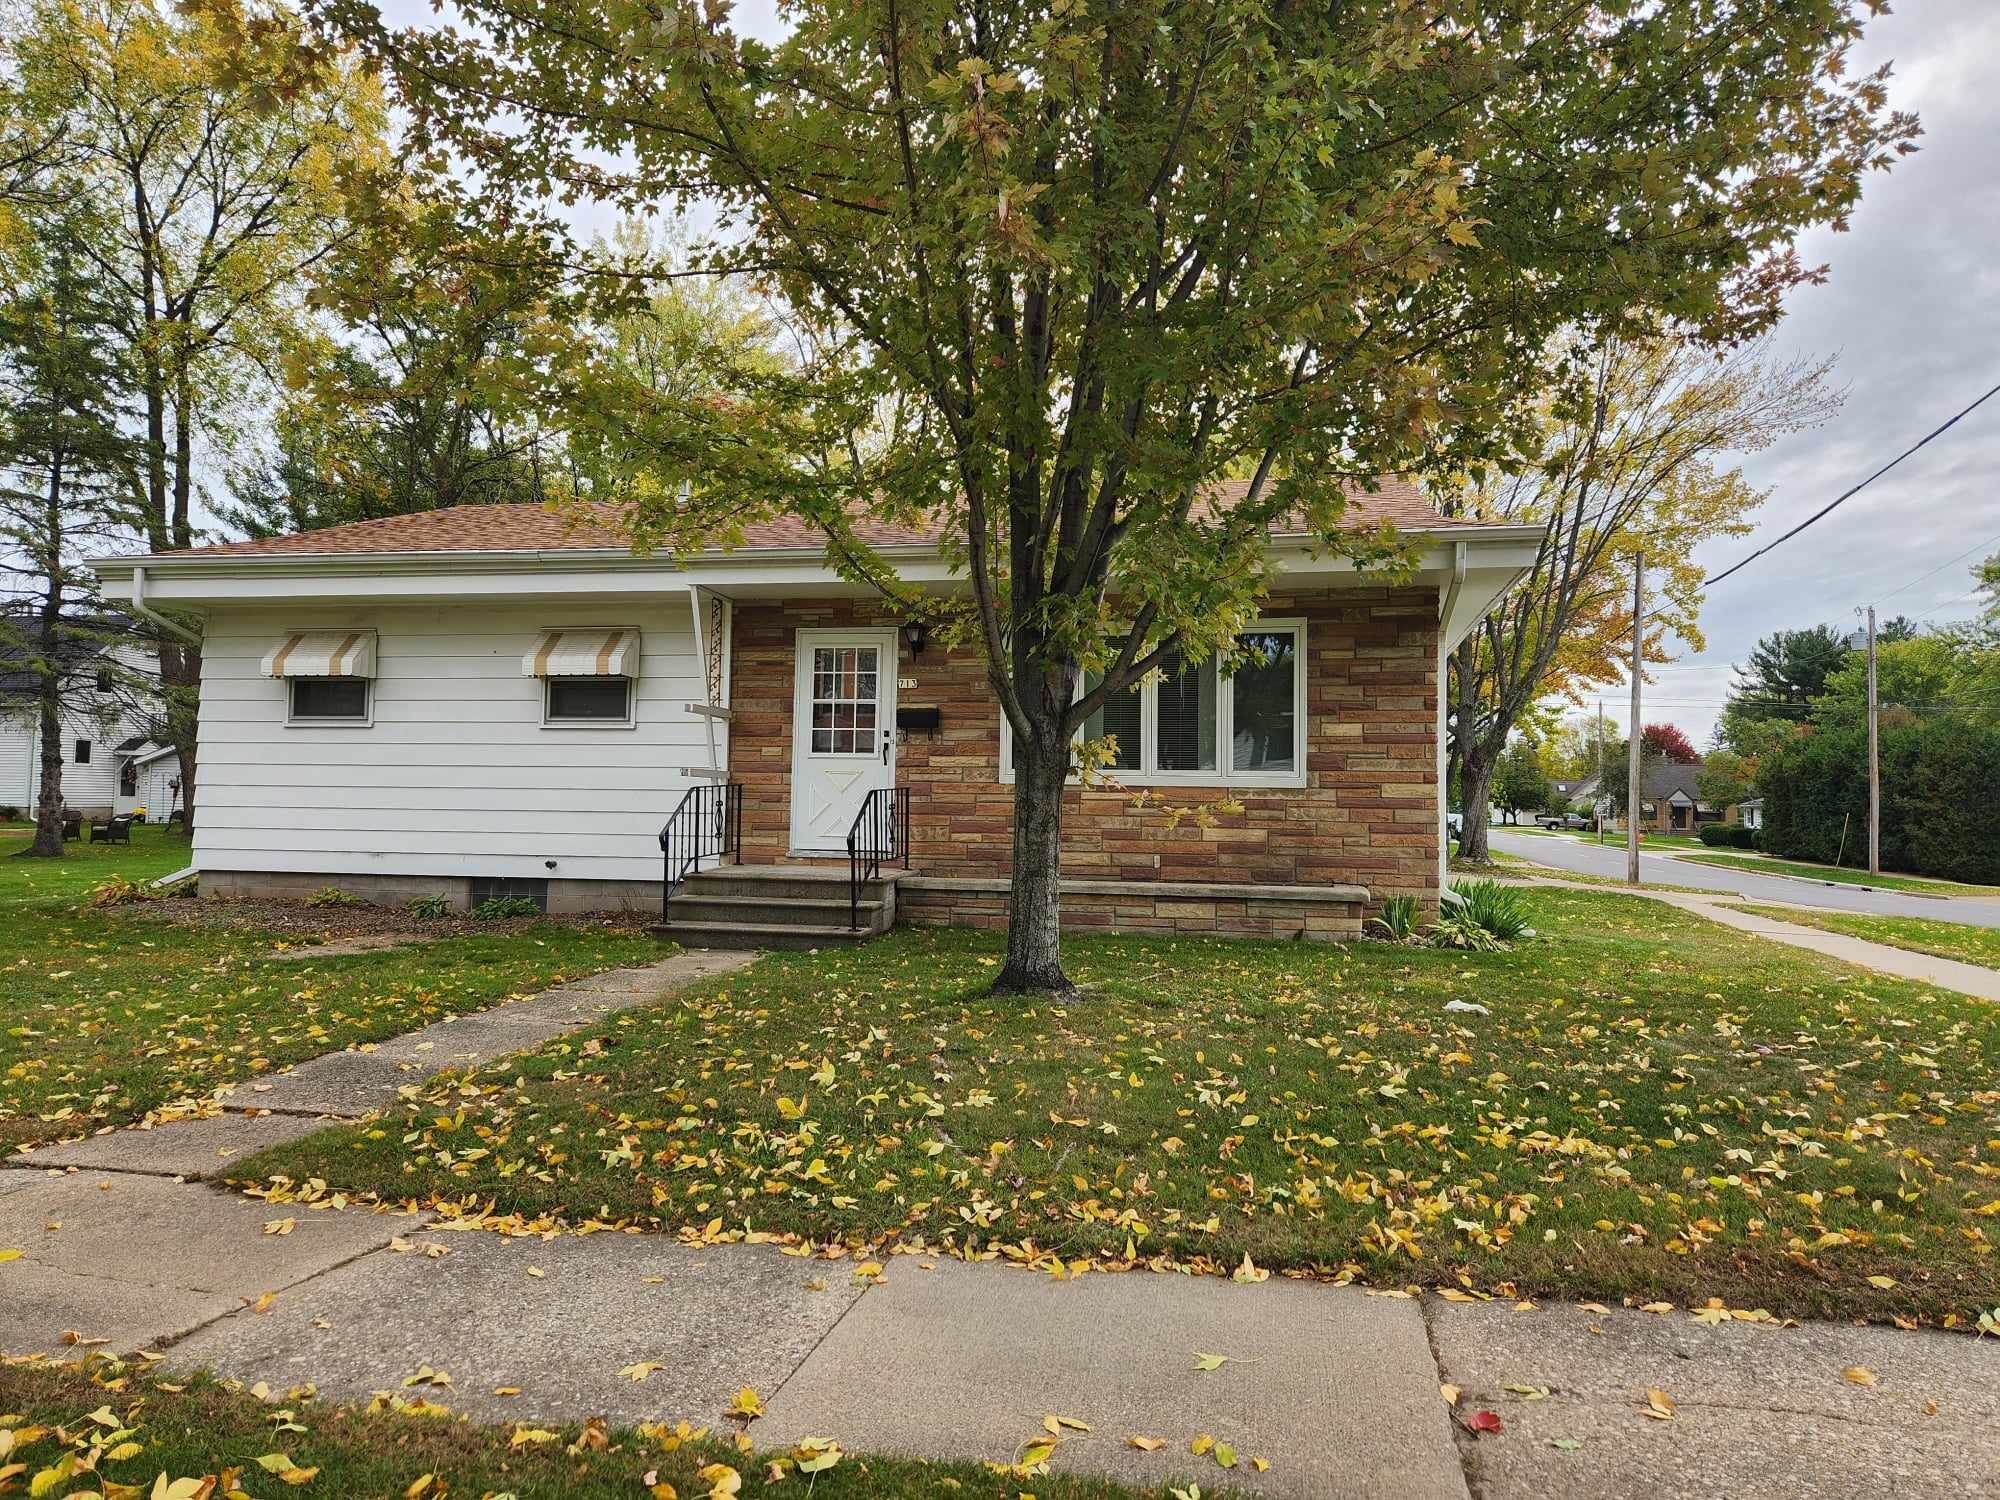 713 S PEACH AVENUE, Marshfield, Wisconsin 54449, 2 Bedrooms Bedrooms, ,1 BathroomBathrooms,Residential,For Sale,713 S PEACH AVENUE,22401156